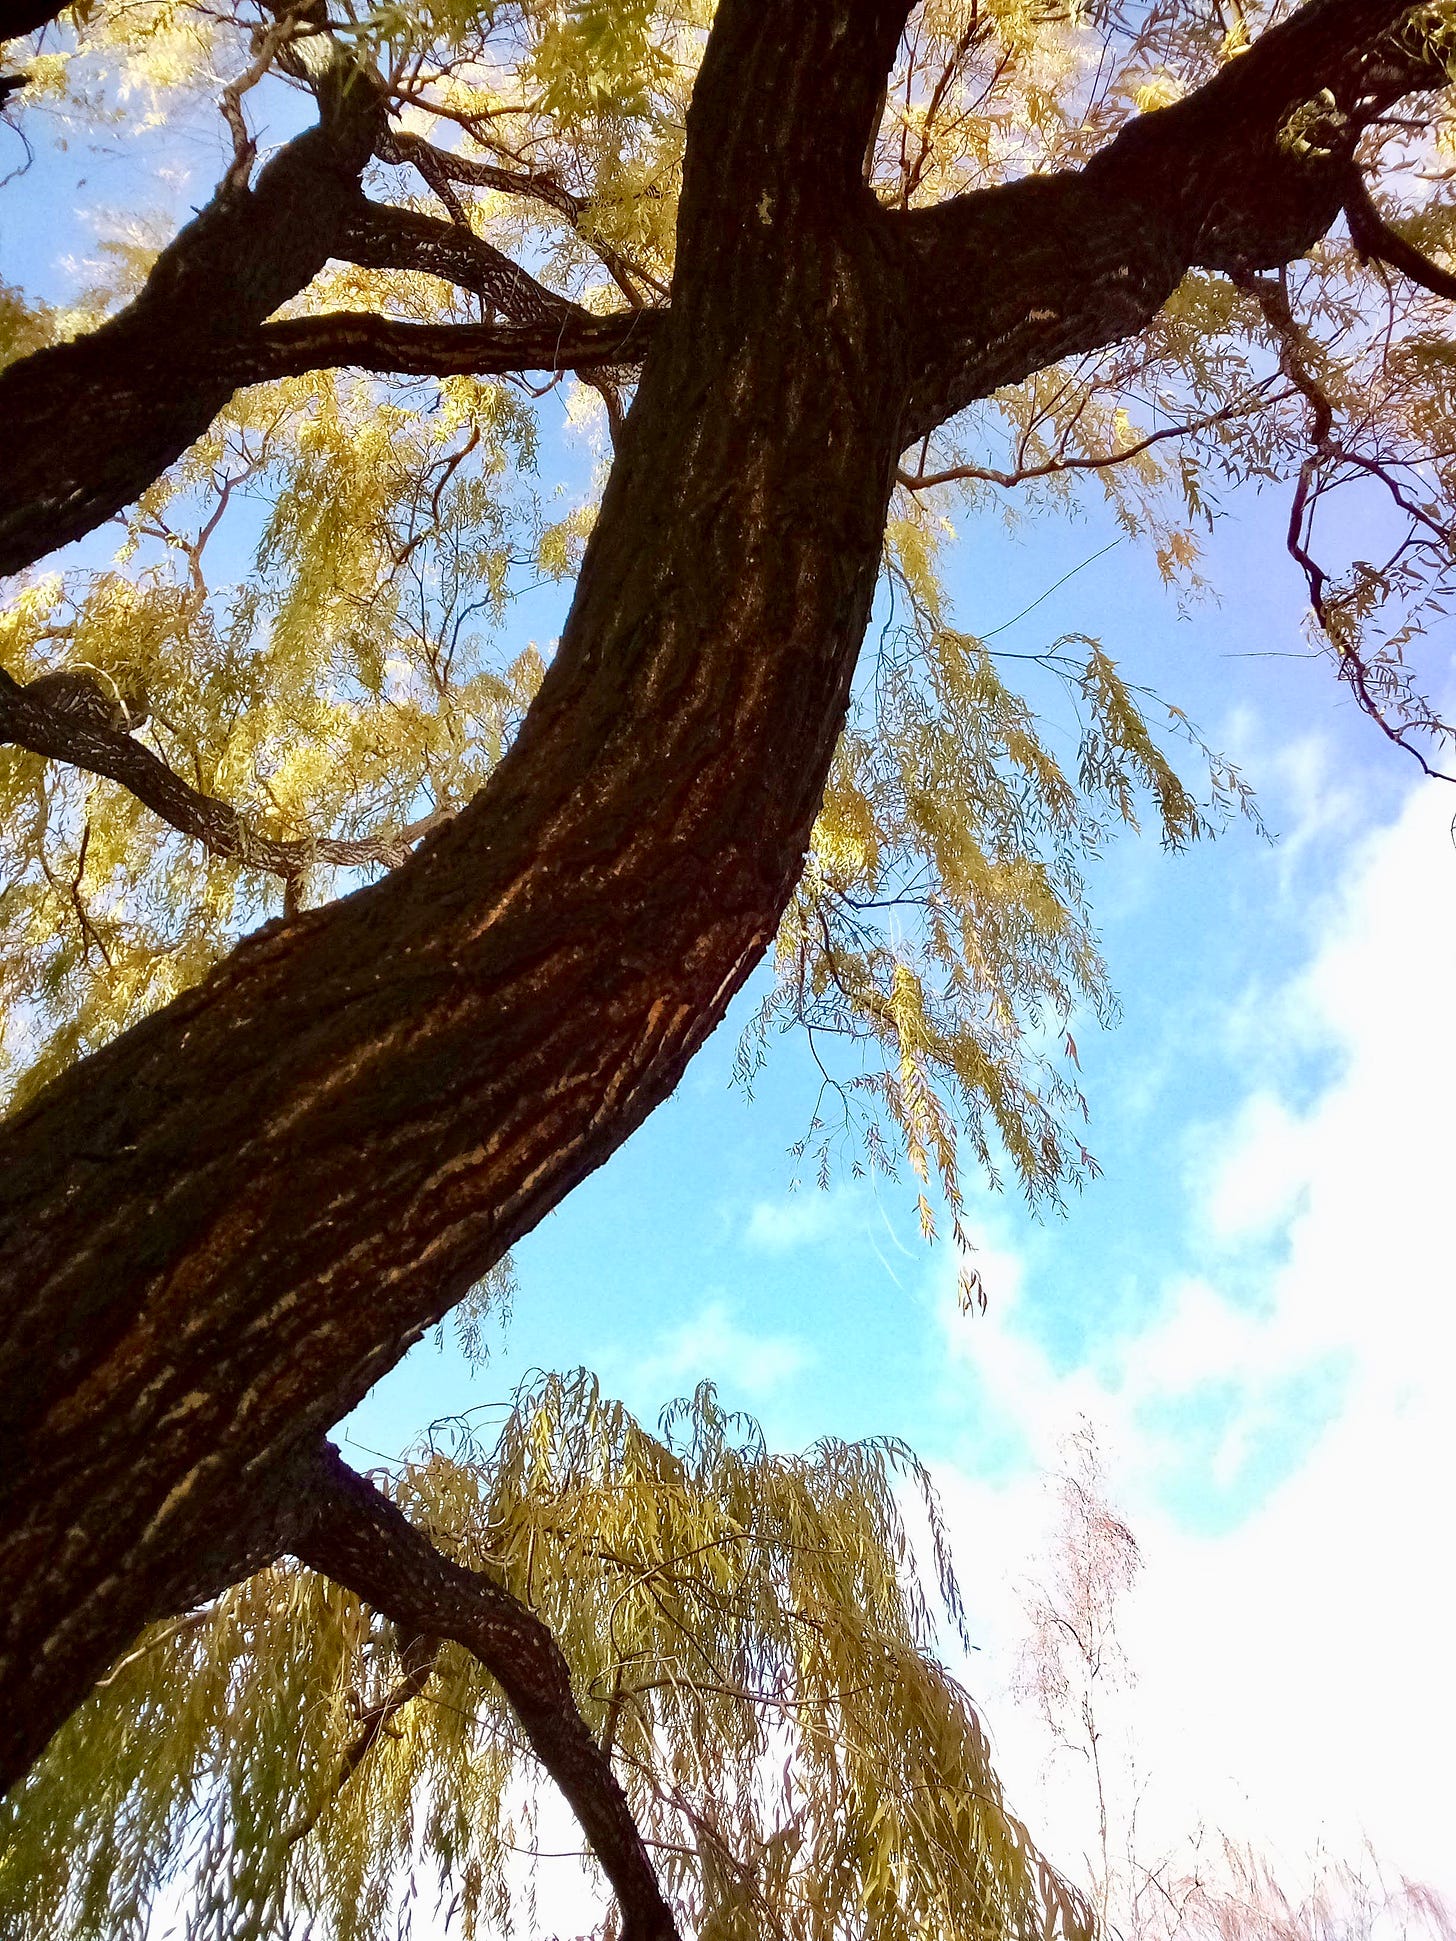 Willow trunk against a blue sky